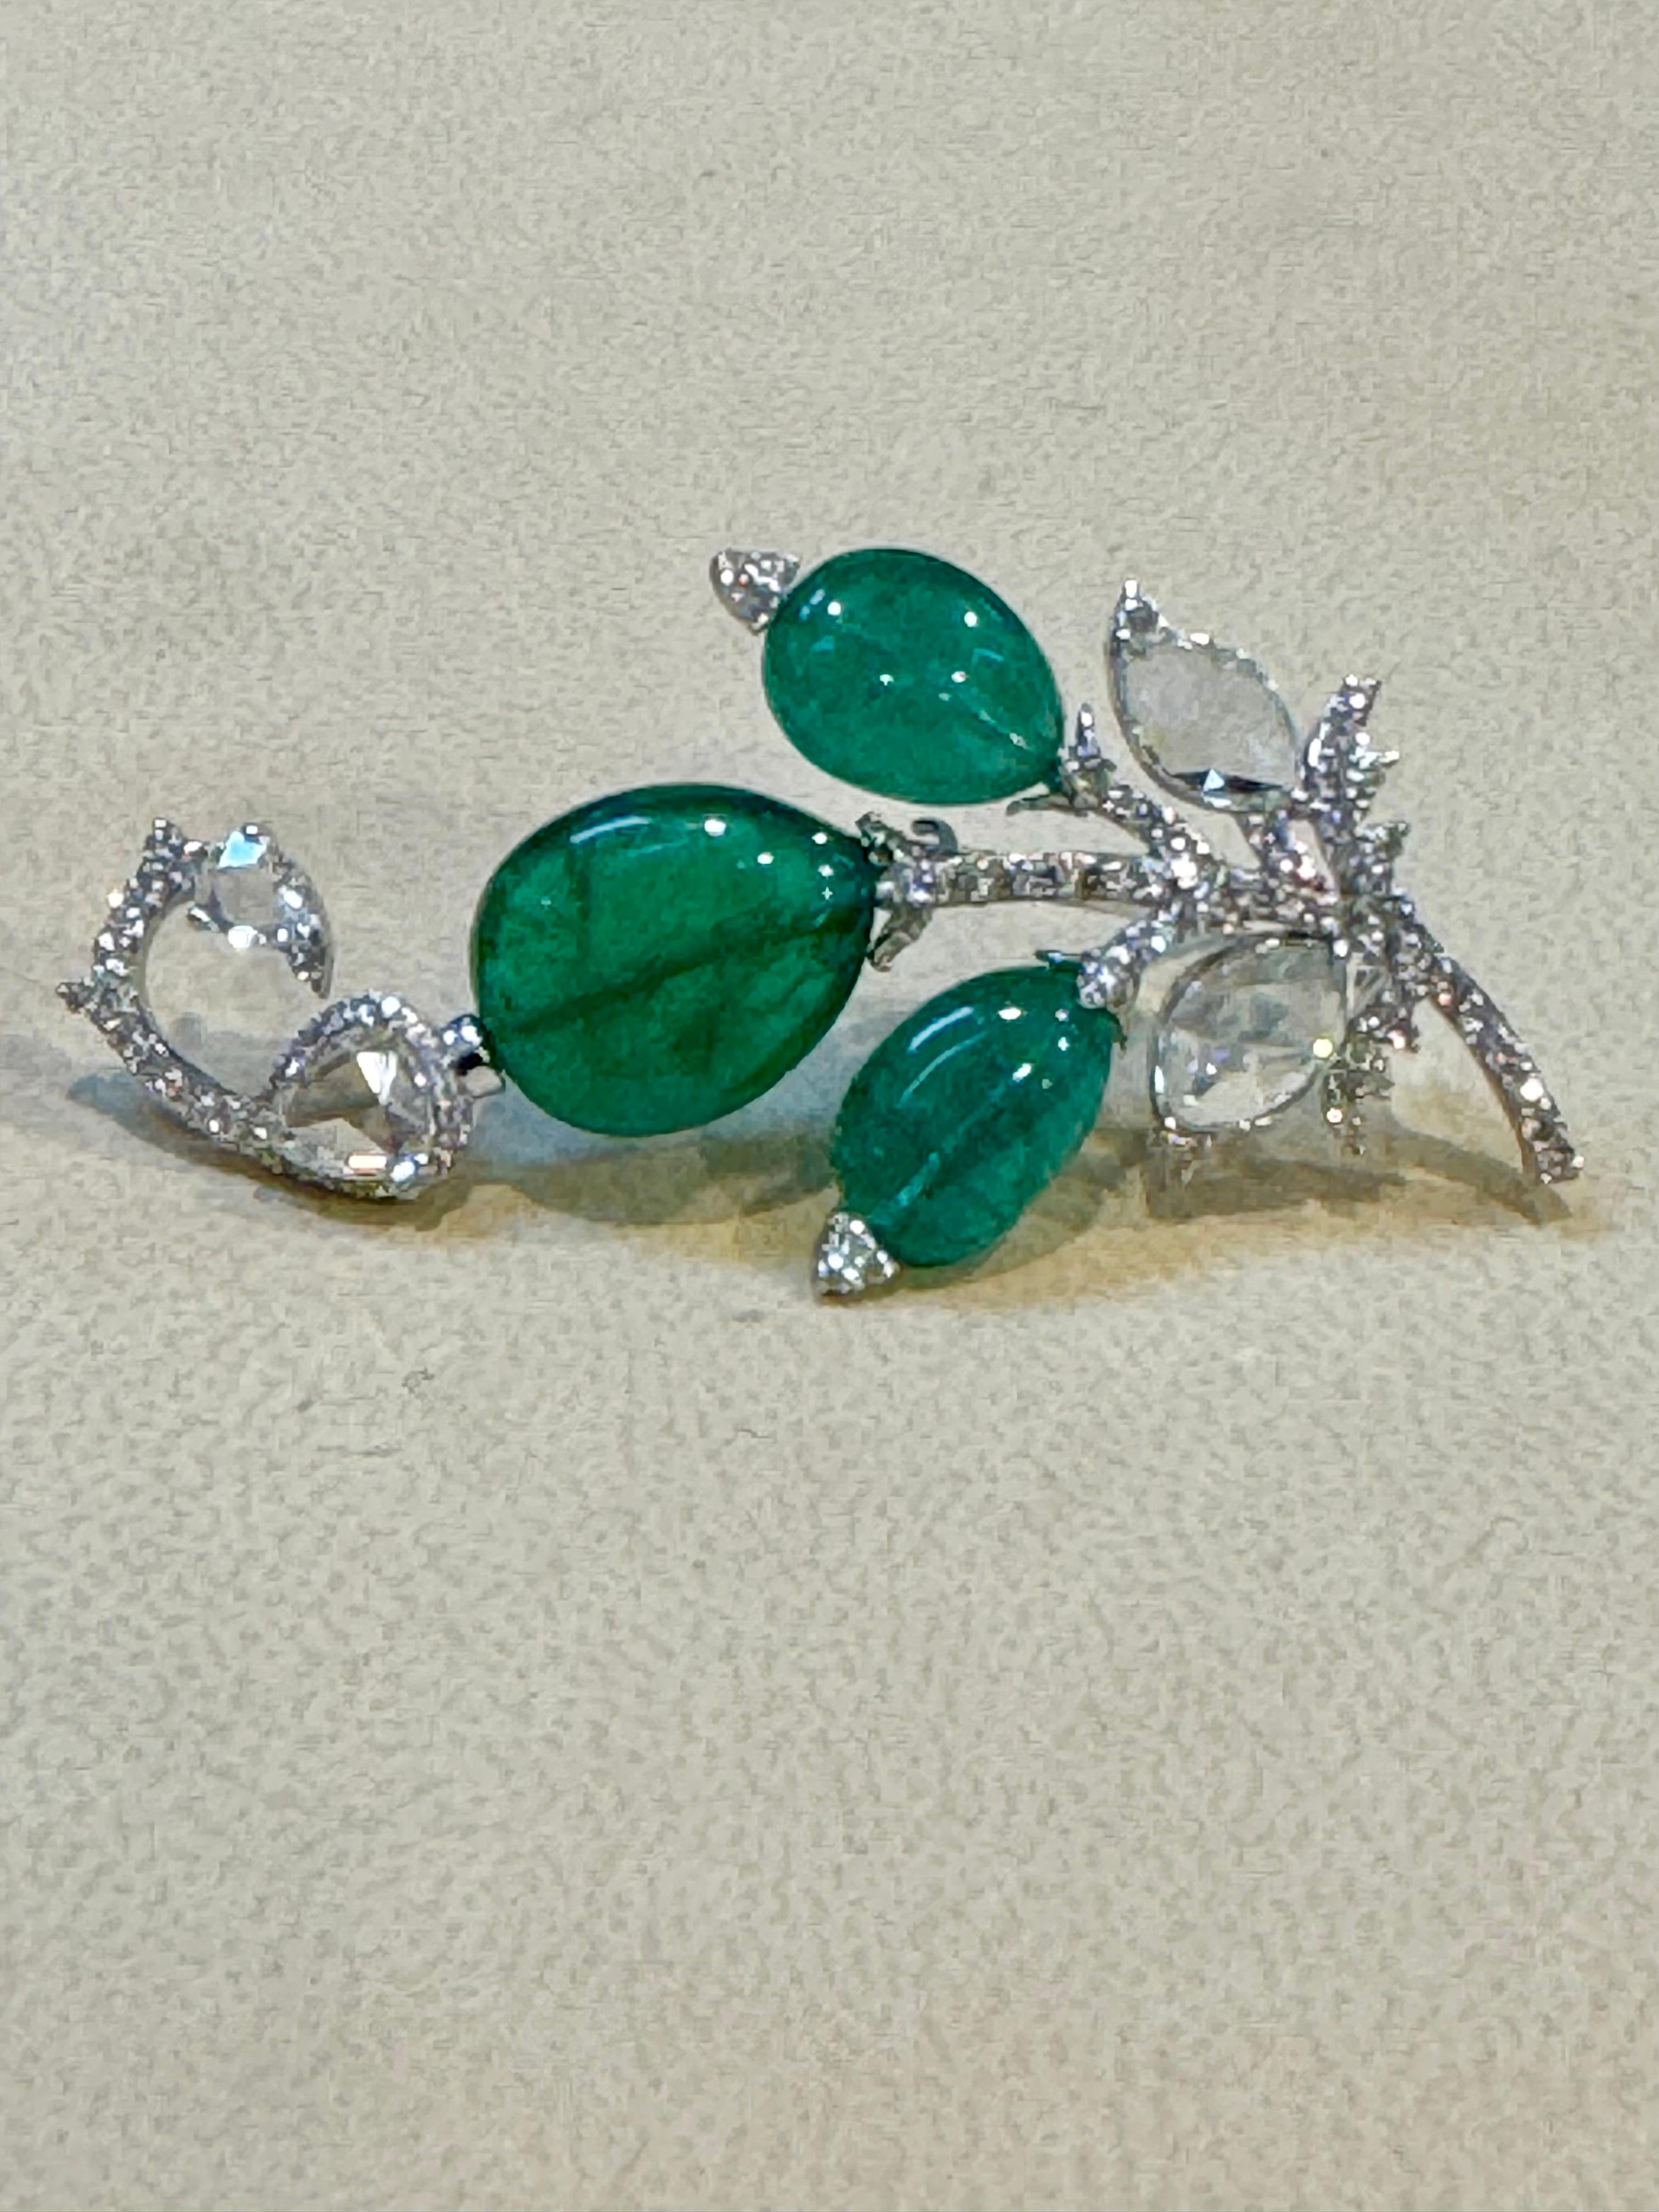 8.5 Ct Natural Oval Emerald Bead & 4 Ct Rose cut Diamond Brooch /Pin 18 Kt Gold For Sale 11